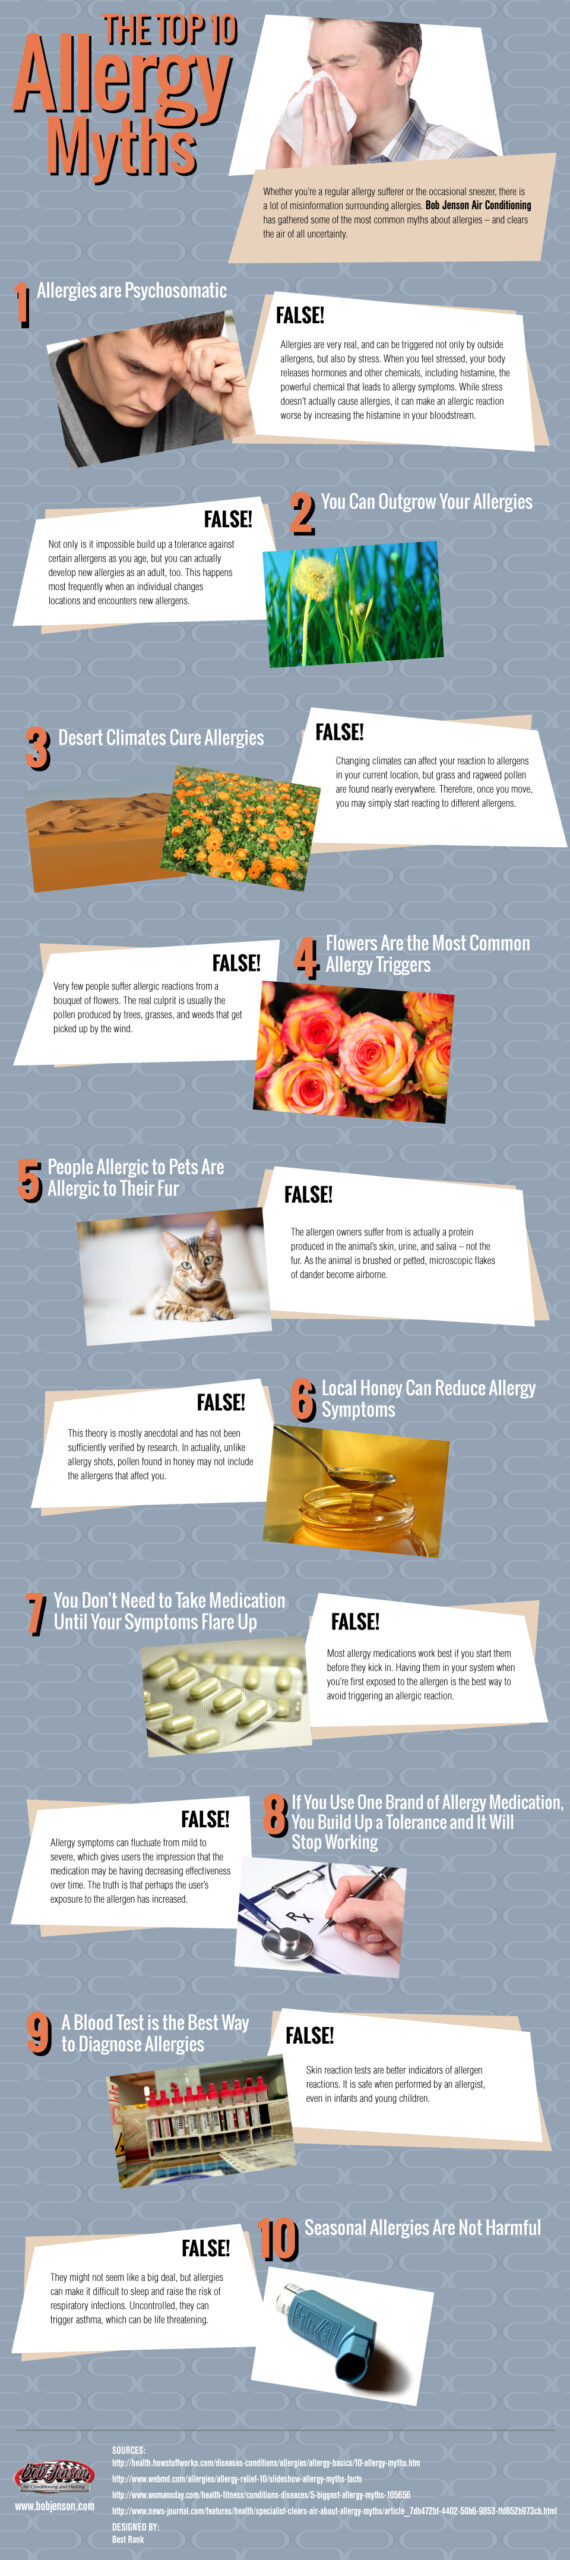 Top Ten Allergy Myths Busted